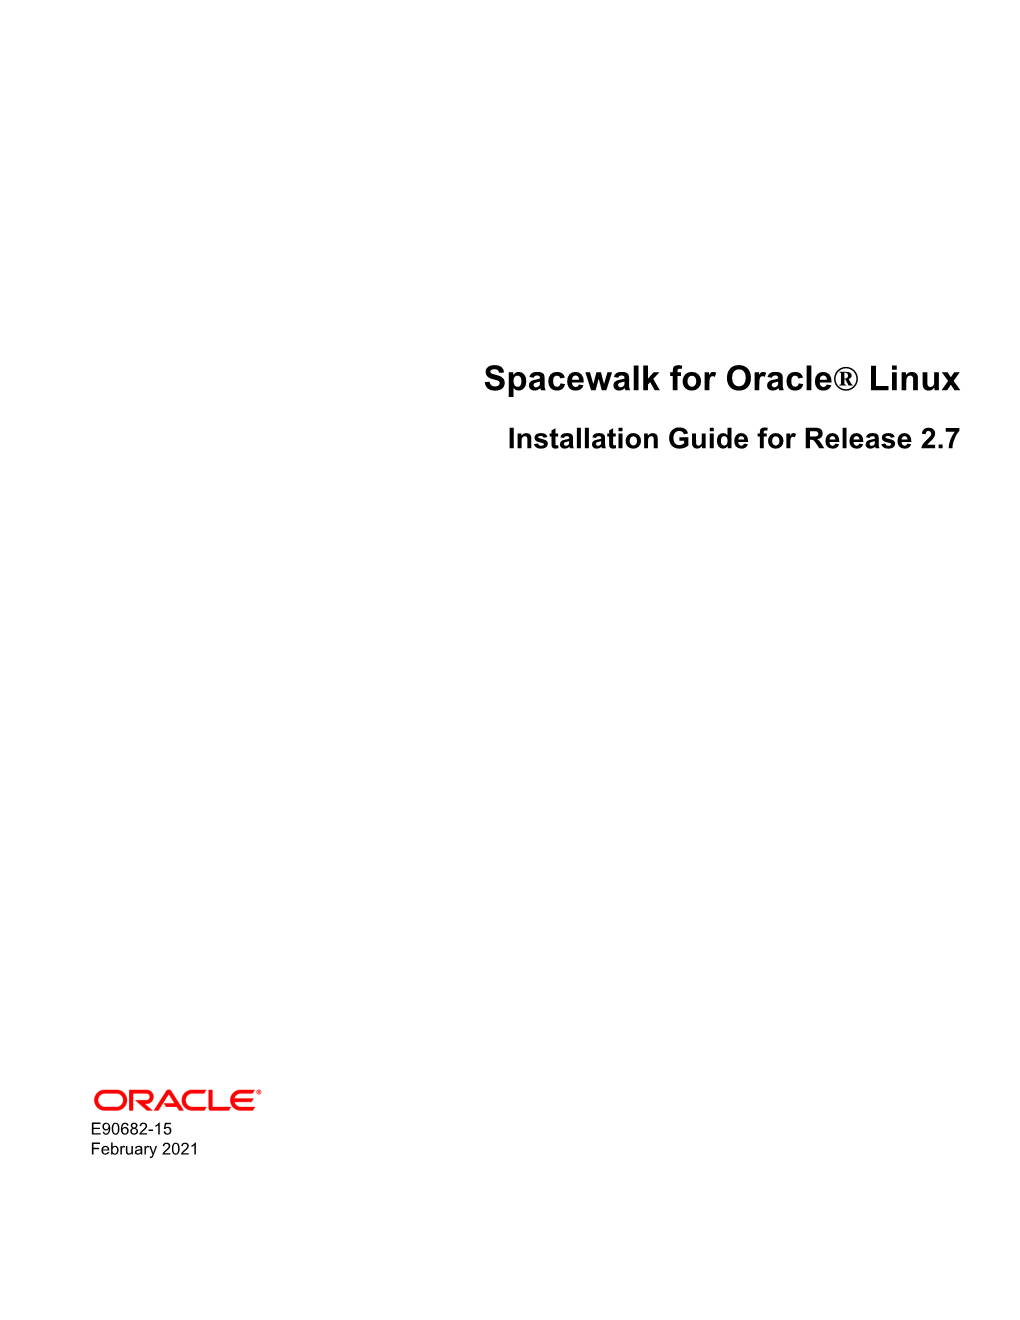 Spacewalk for Oracle® Linux Installation Guide for Release 2.7